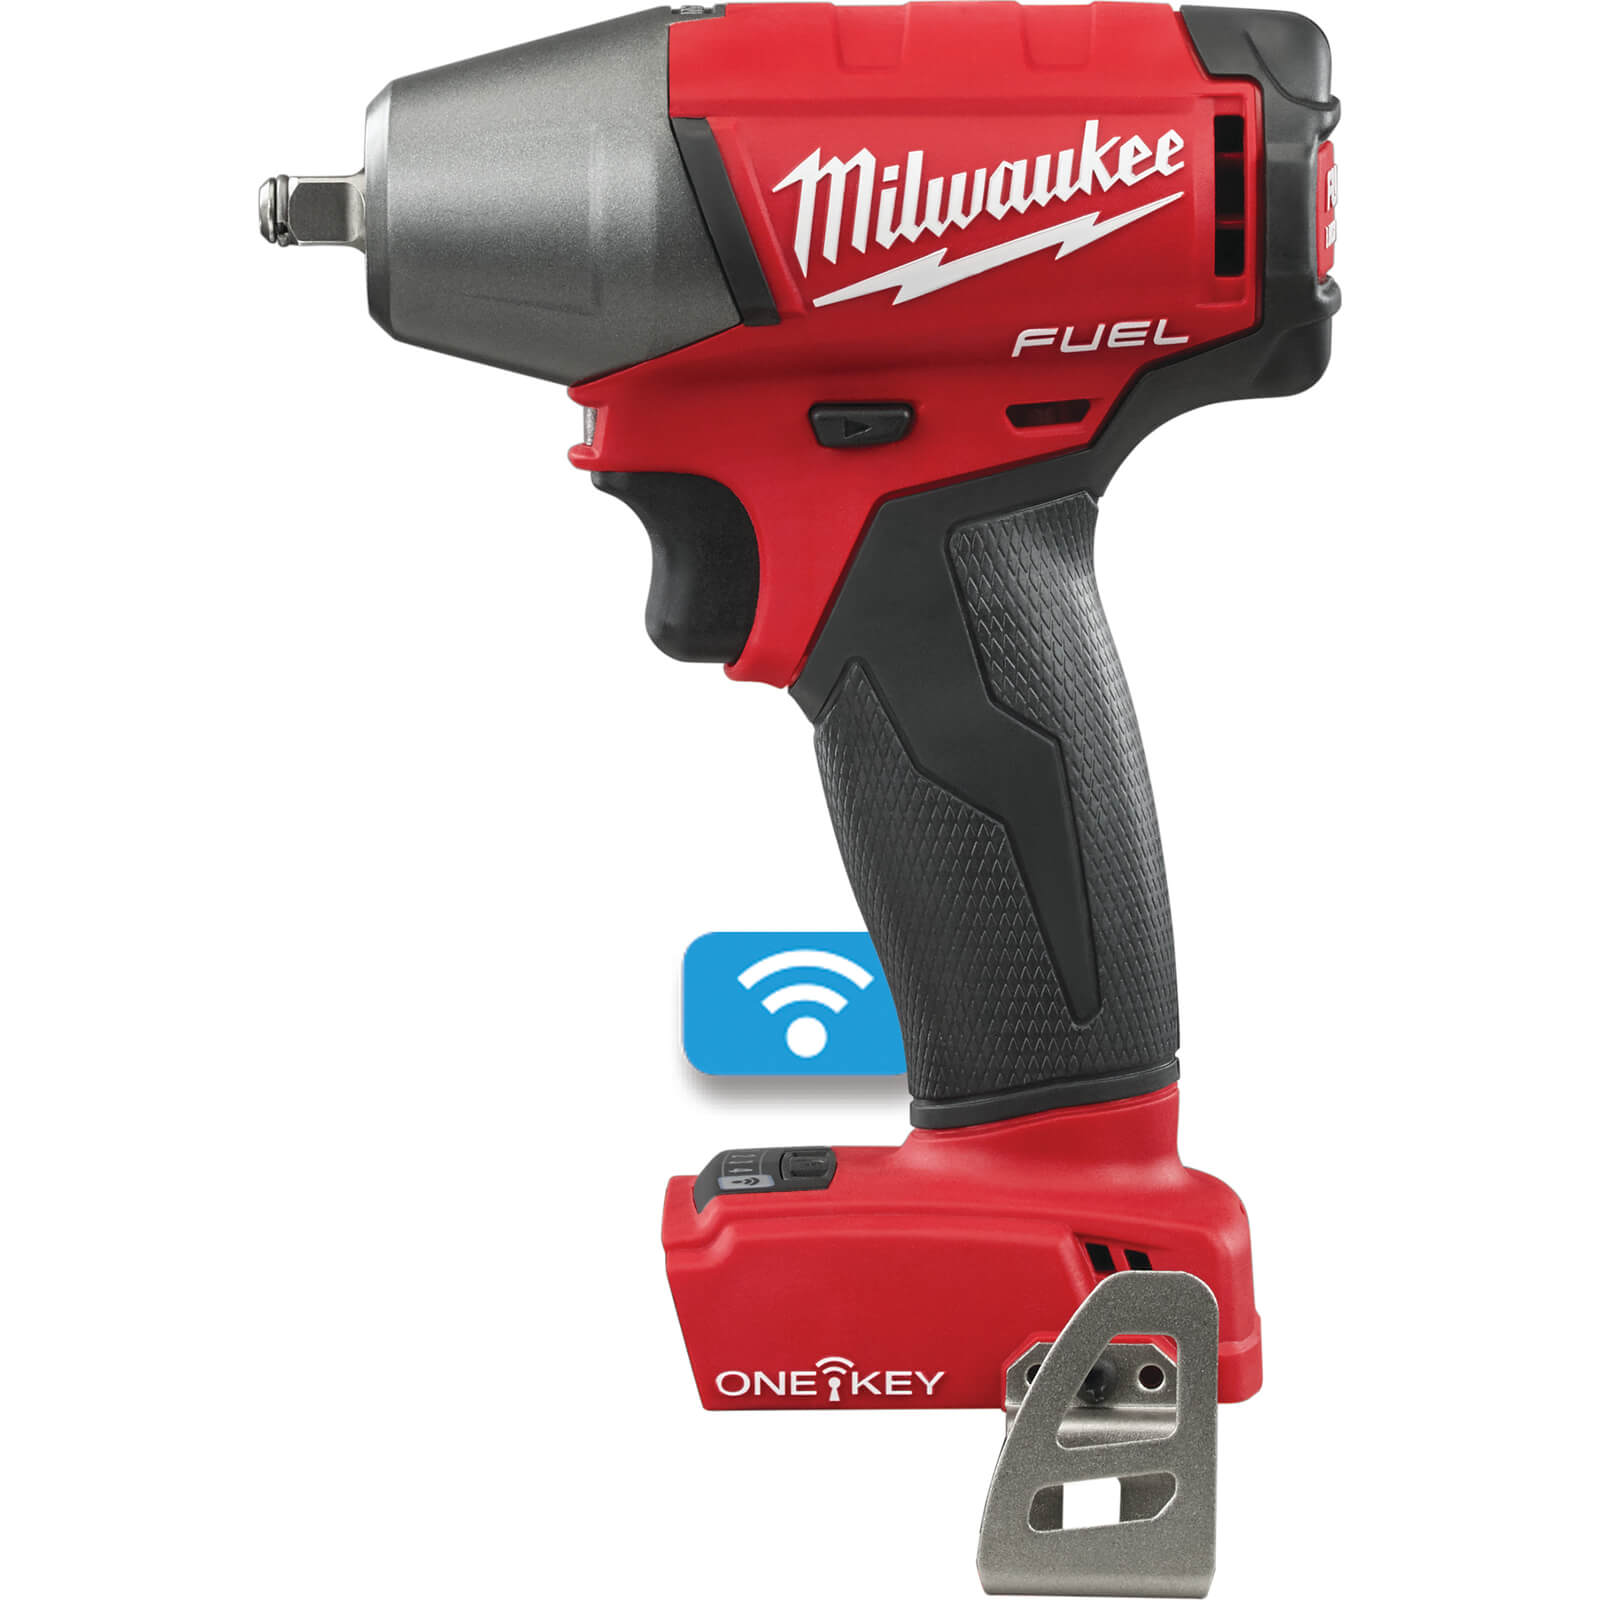 Milwaukee M18 ONEIWF38 Fuel 18v Cordless Brushless 3/8" Drive Impact Wrench No Batteries No Charger No Case